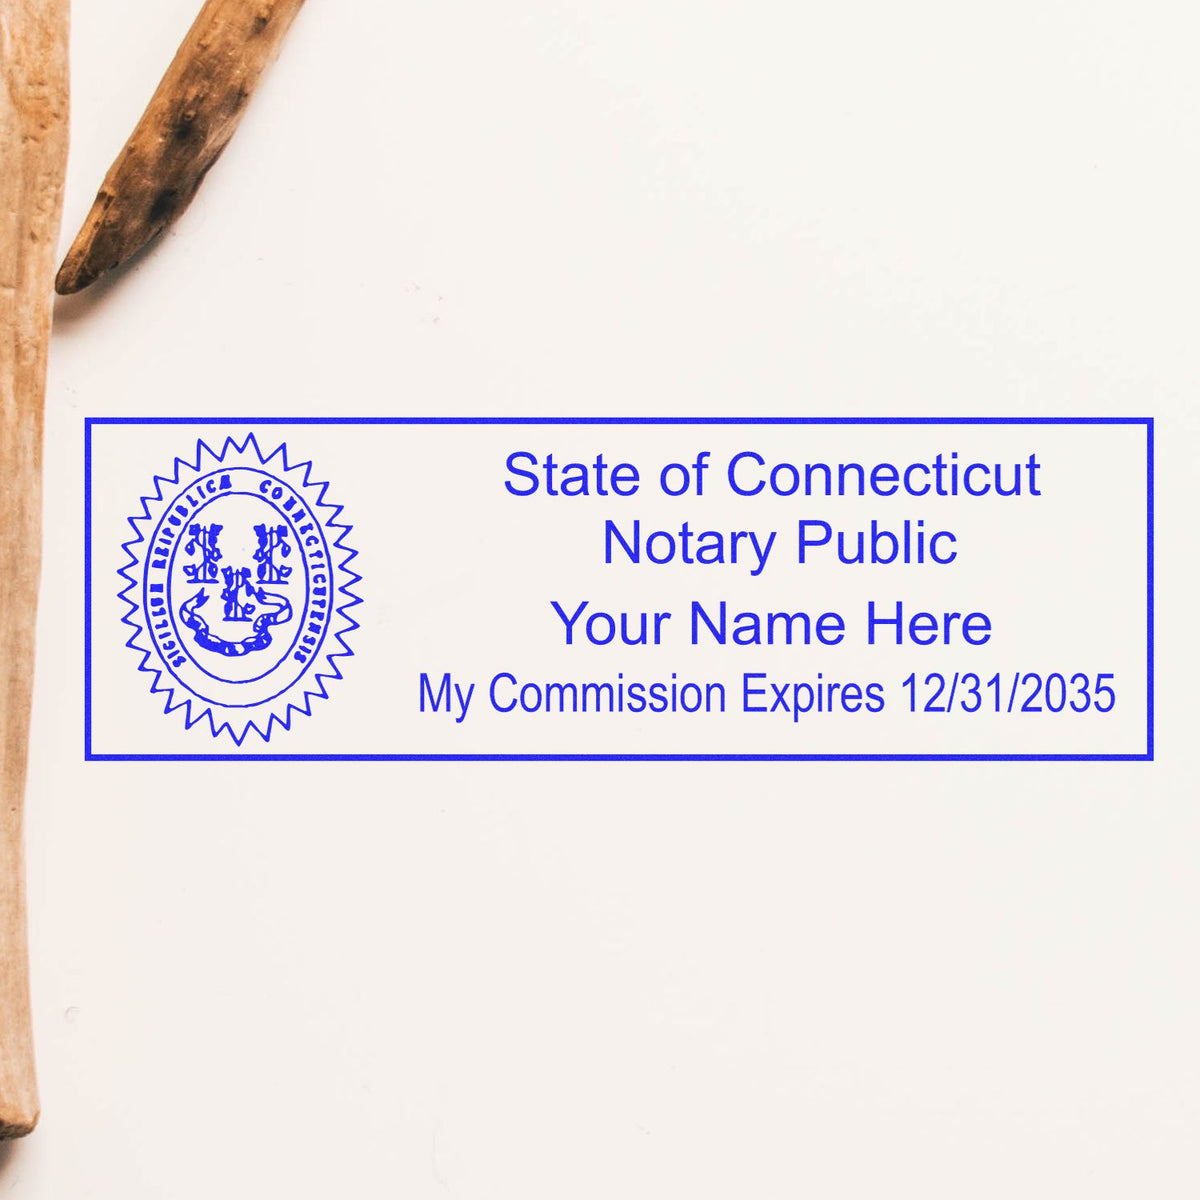 This paper is stamped with a sample imprint of the Slim Pre-Inked State Seal Notary Stamp for Connecticut, signifying its quality and reliability.